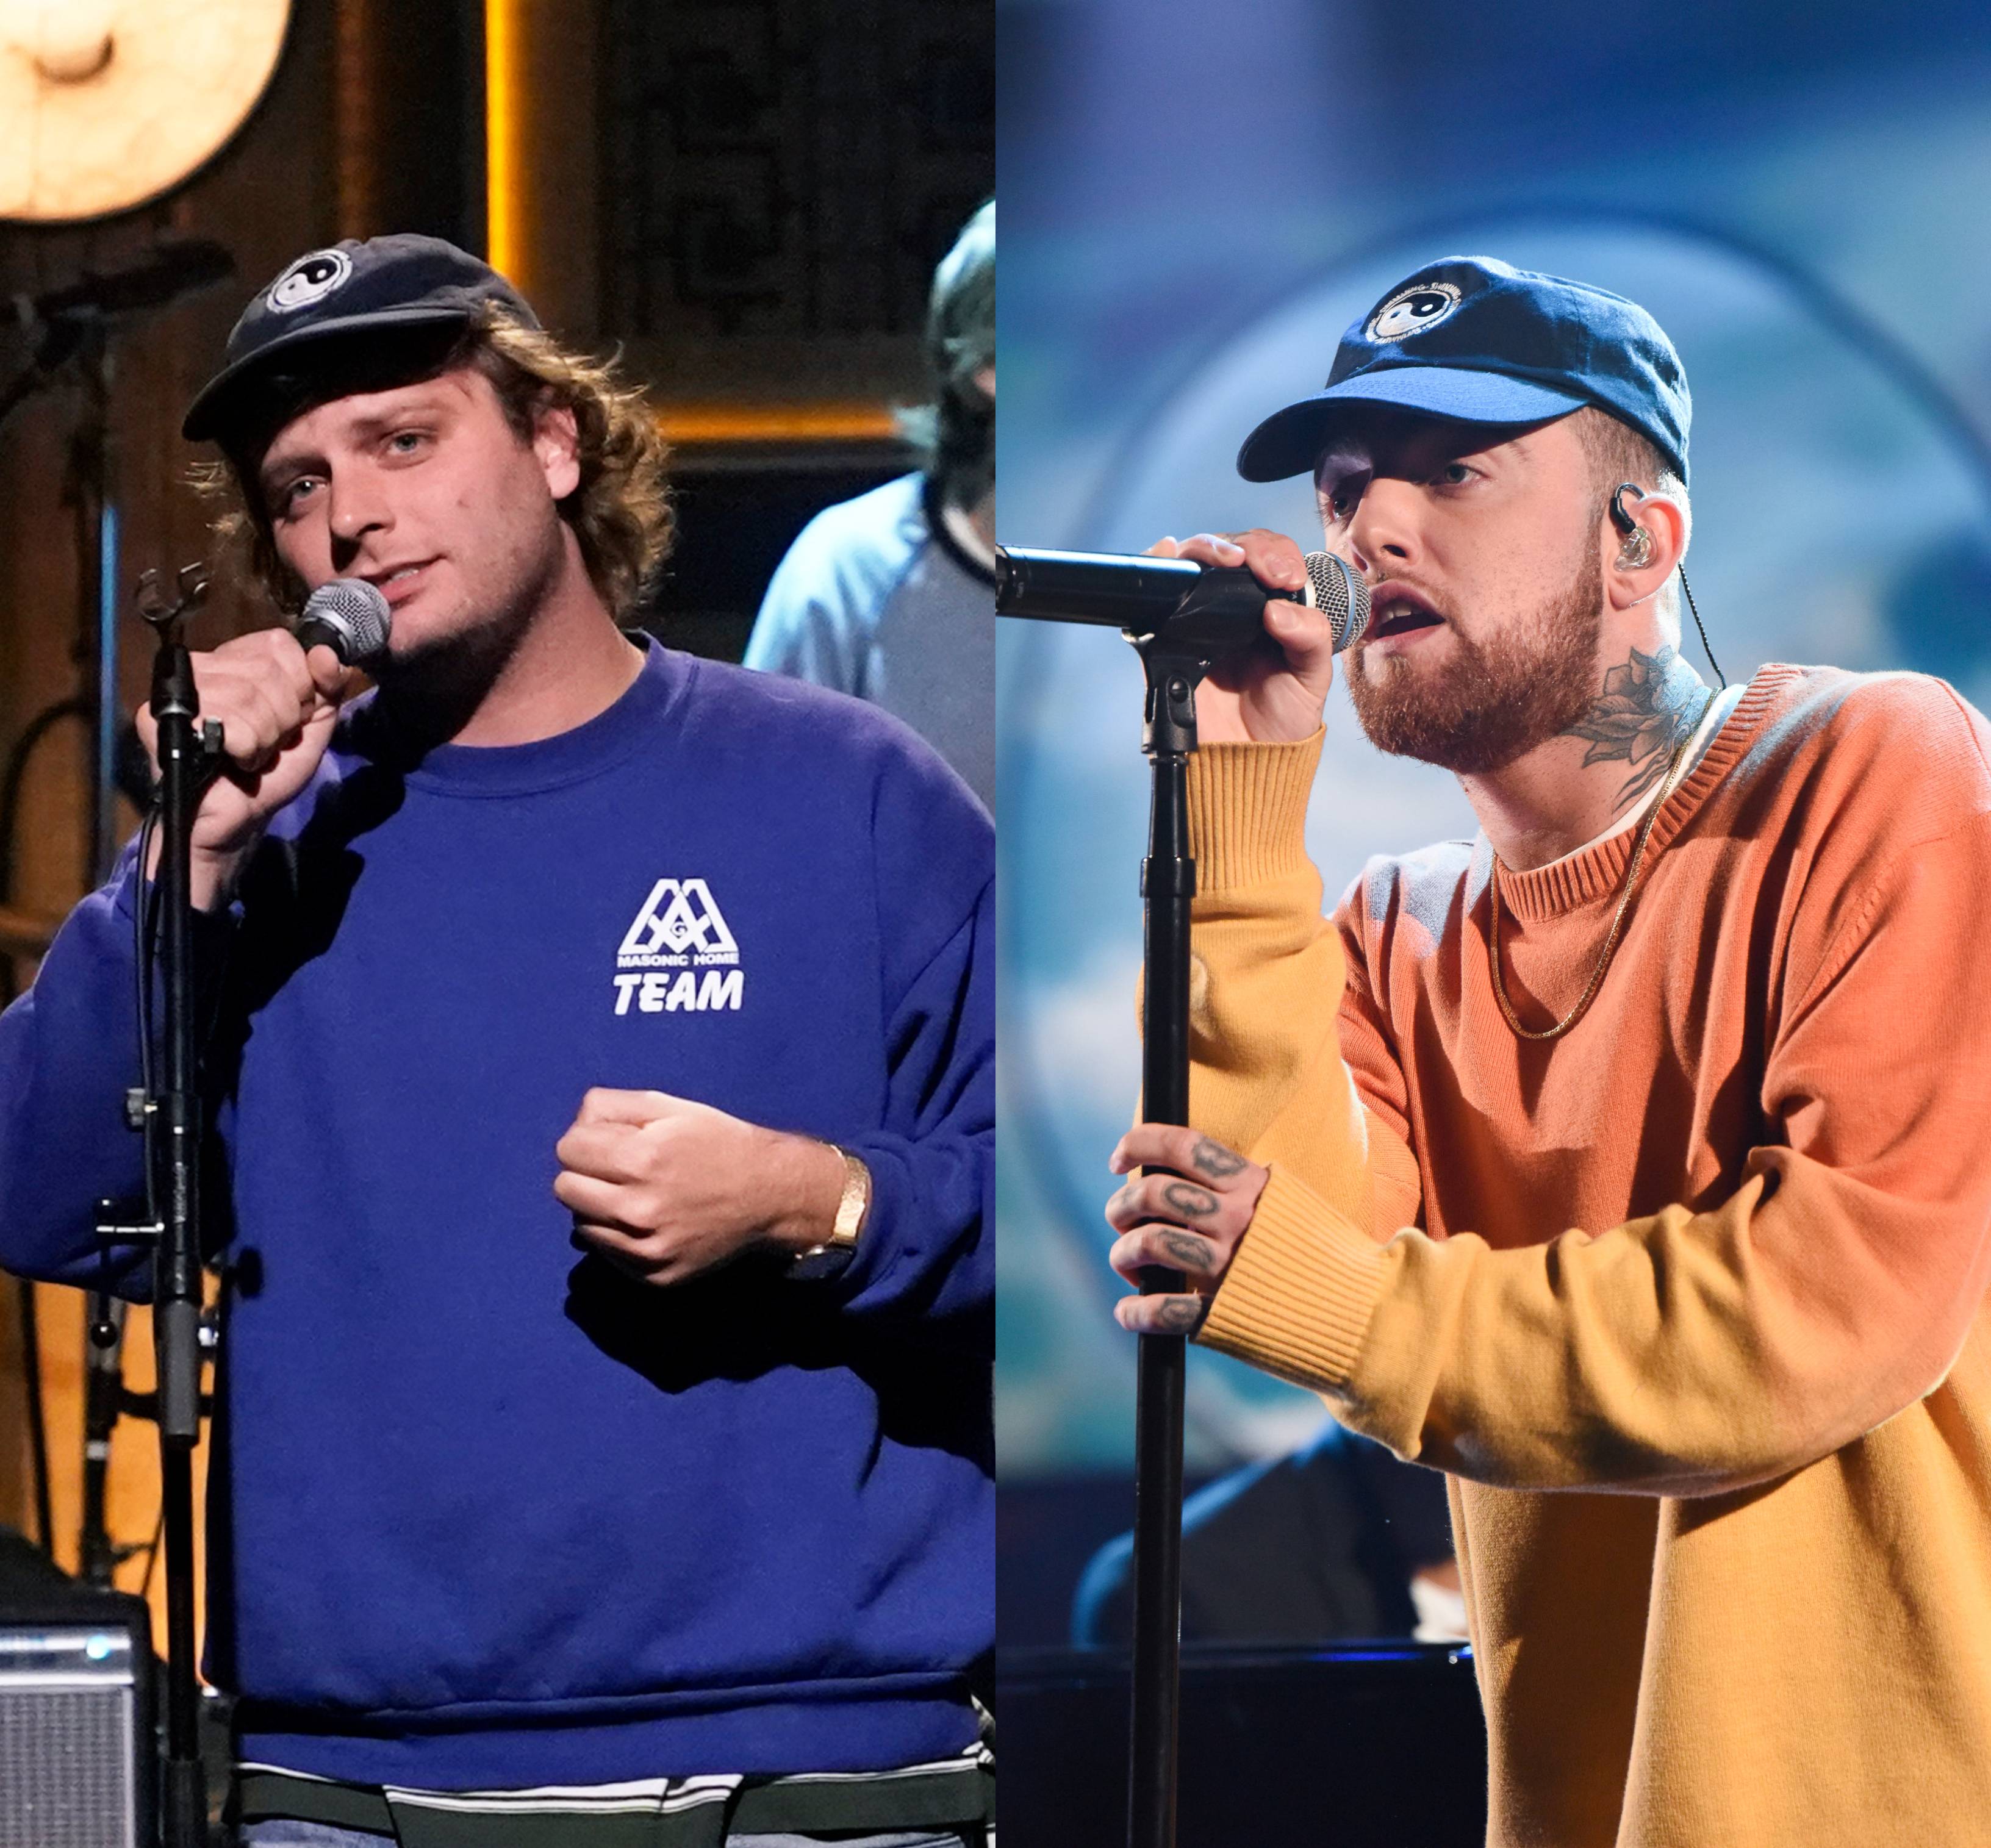 Mac DeMarco's New Album Features Two Tributes To His Pal Mac Miller